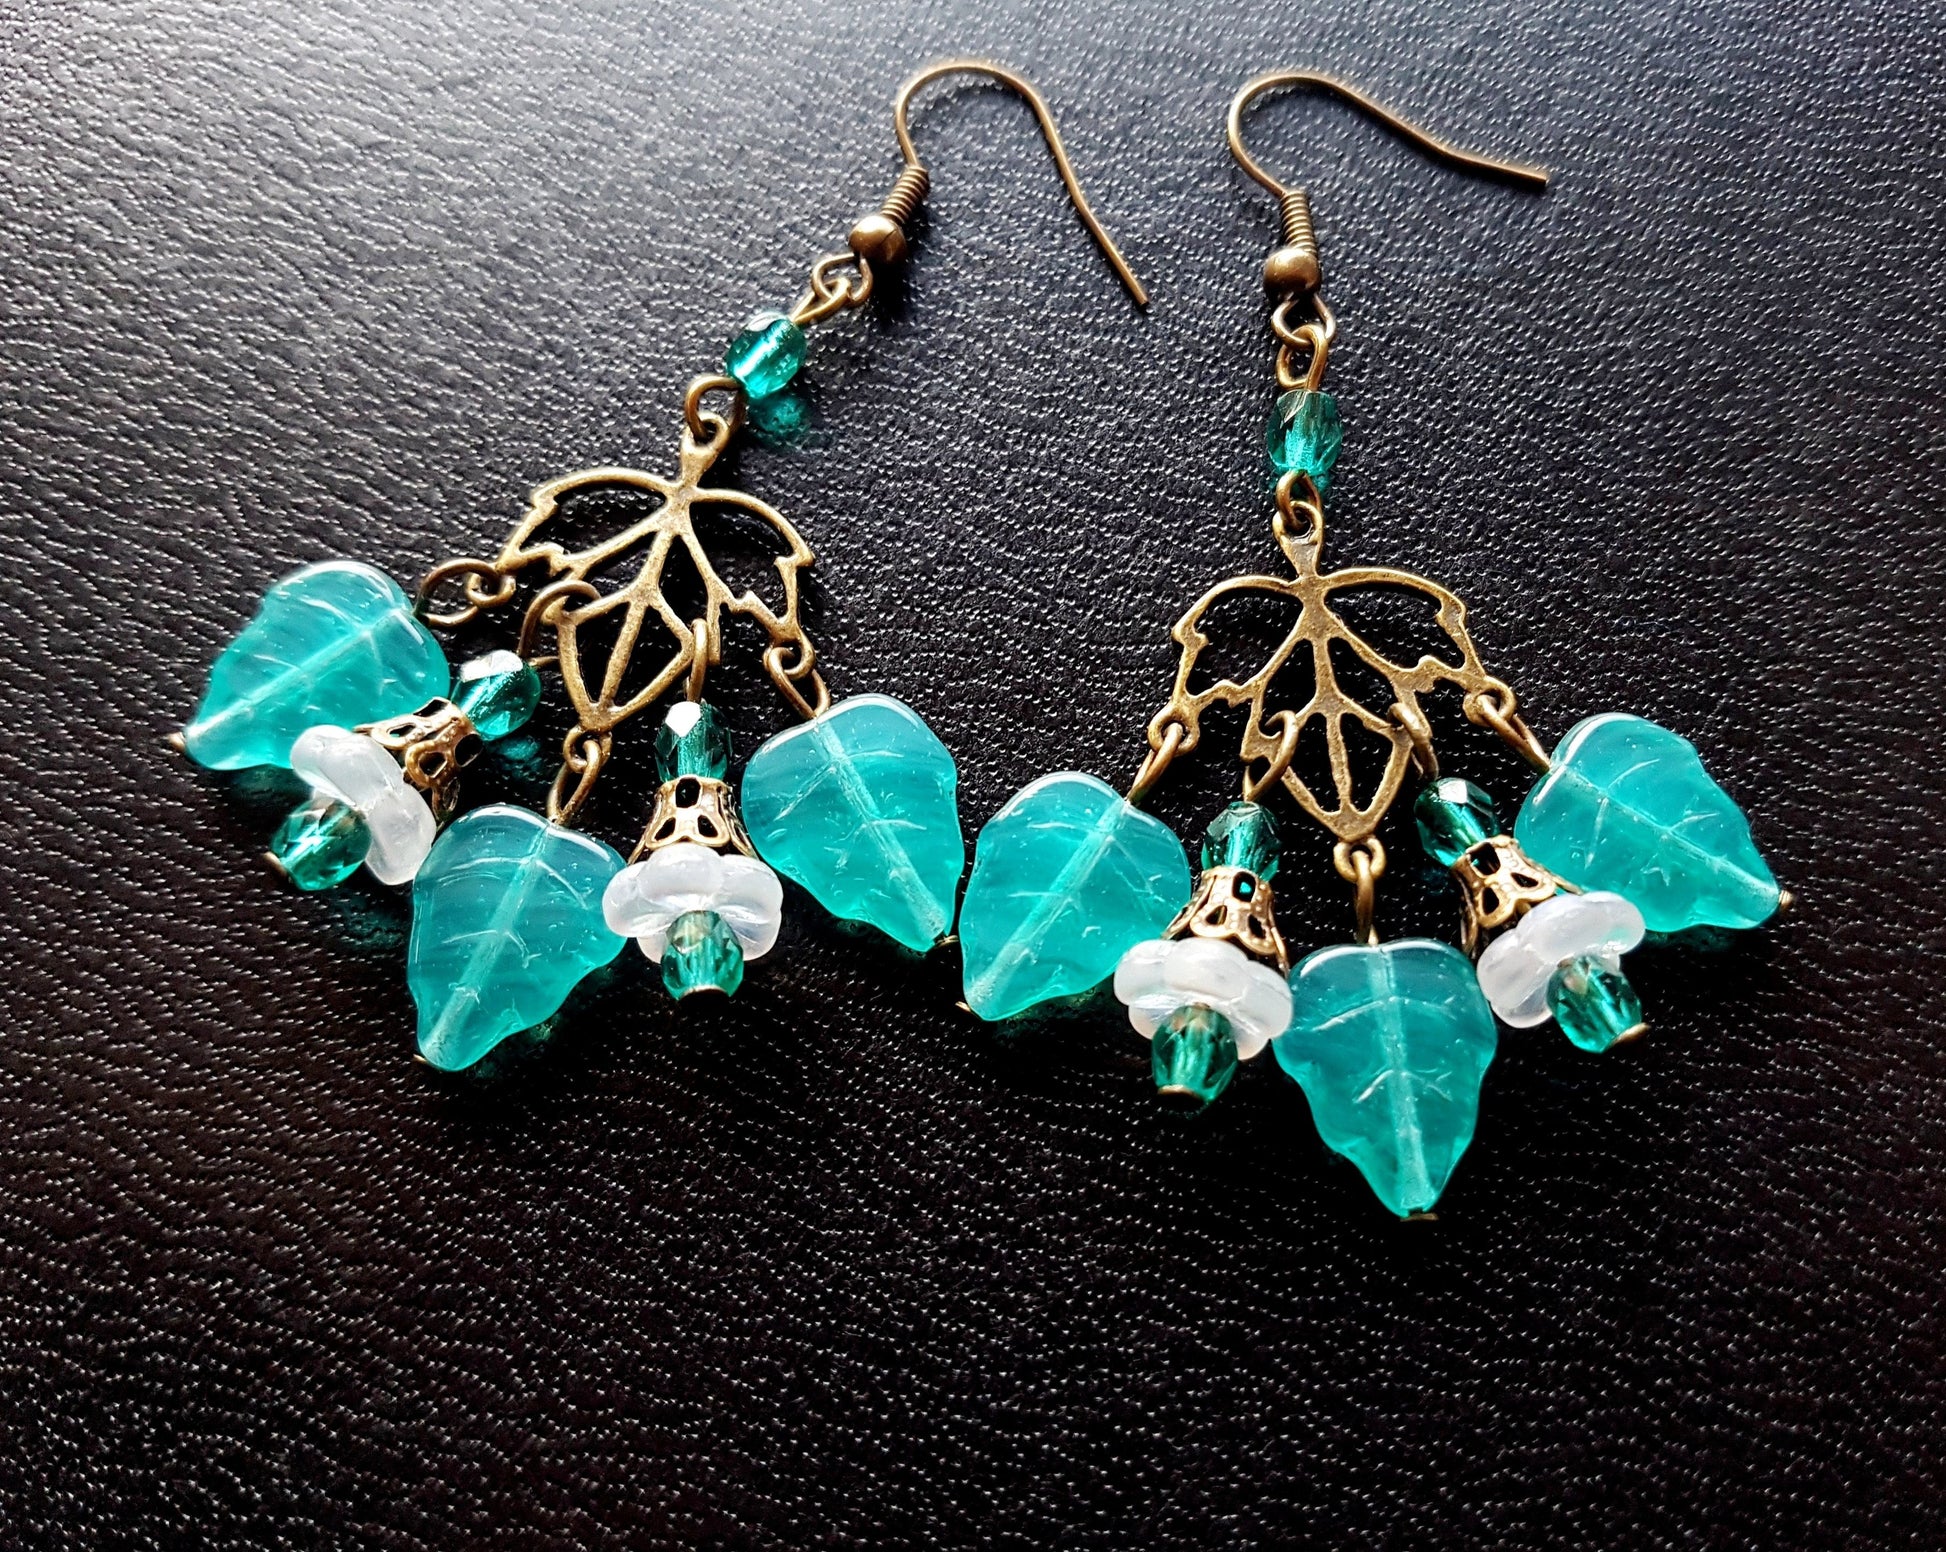 Vintage Style Leaf Chandelier Earrings, Glass Breen leaves and little white flowers on Antique Brass / Bronze color metal